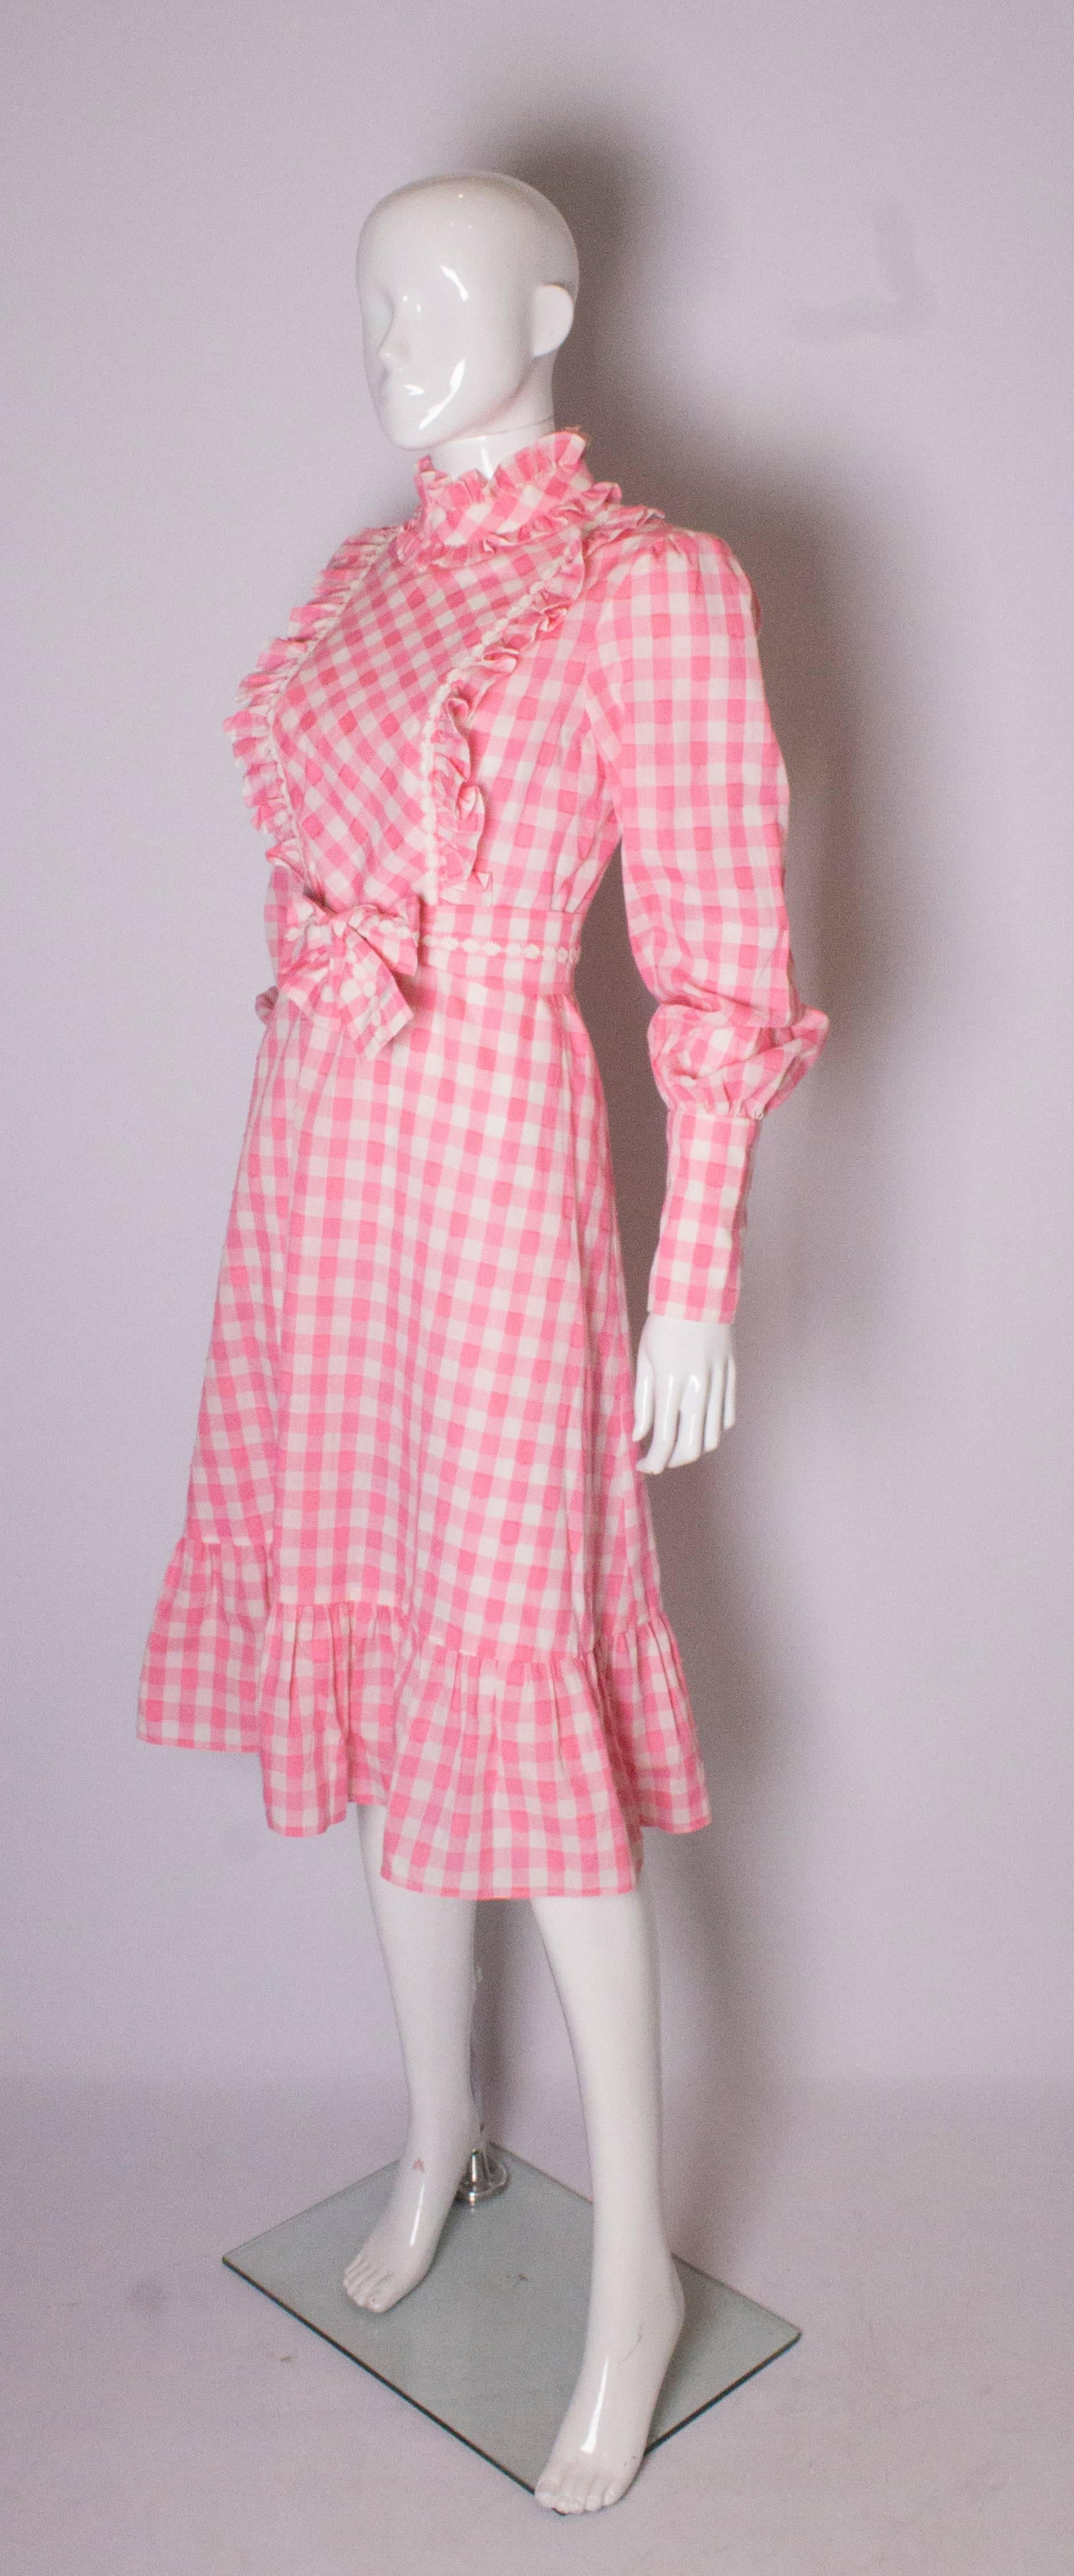 Women's Vintage Susan Small Pink and White Dress